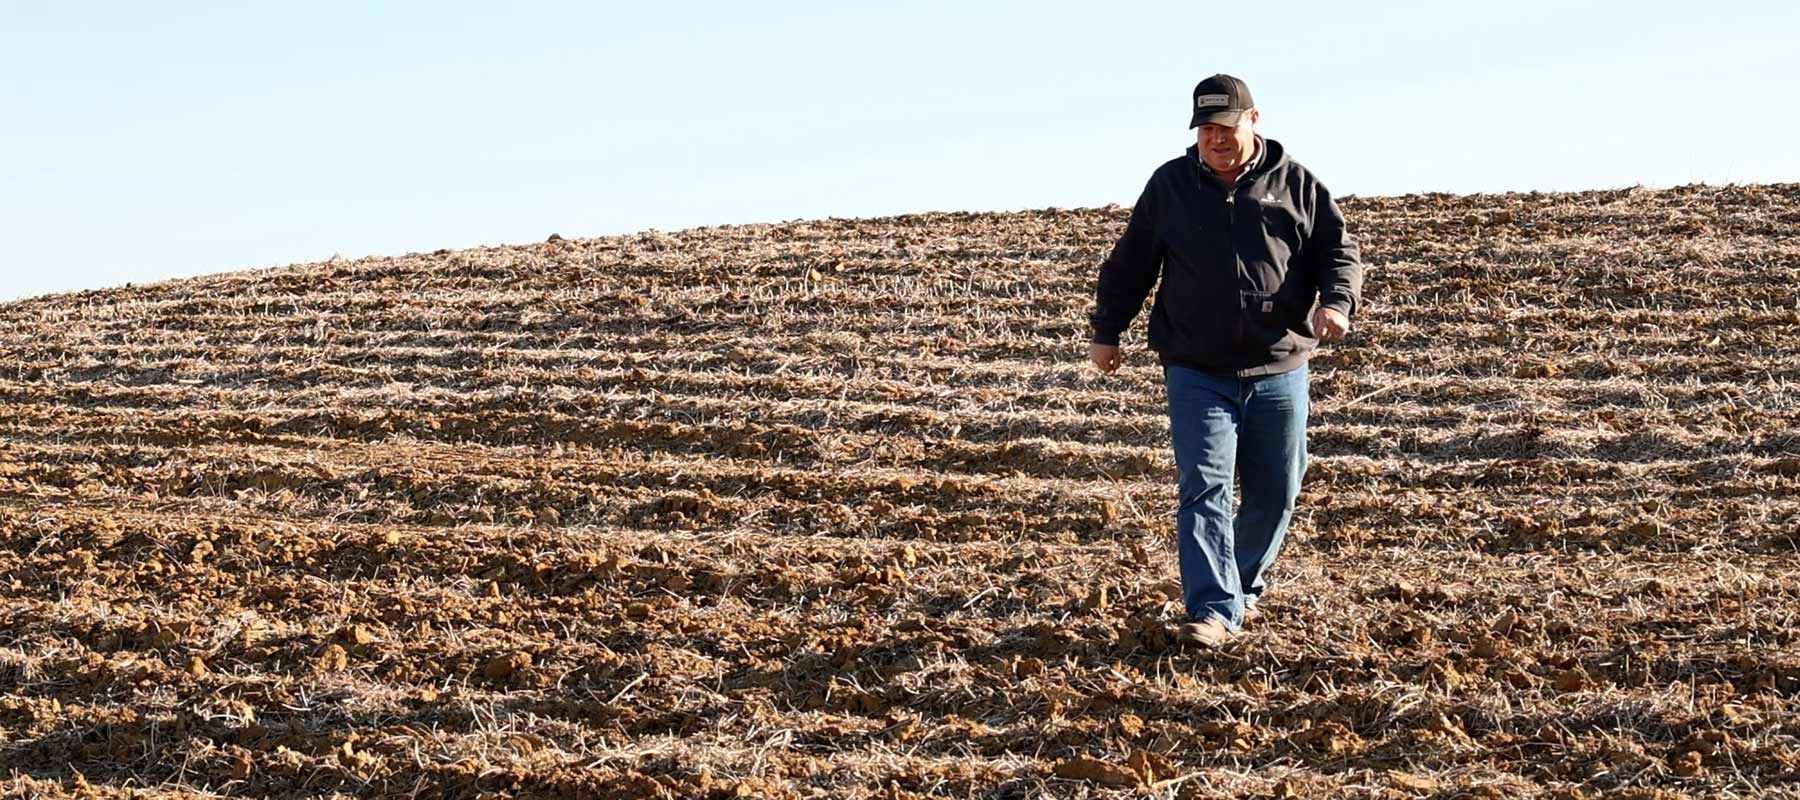 Farmer walking down hill, with crop rows arranged to reduce water erosion. Steve Turner, a farmer in Cass and Mason counties, walks down an example of highly erodible land on farm ground near his home outside Chandlerville. Turner uses cover crops, grass waterways, residue management and other conservation techniques.